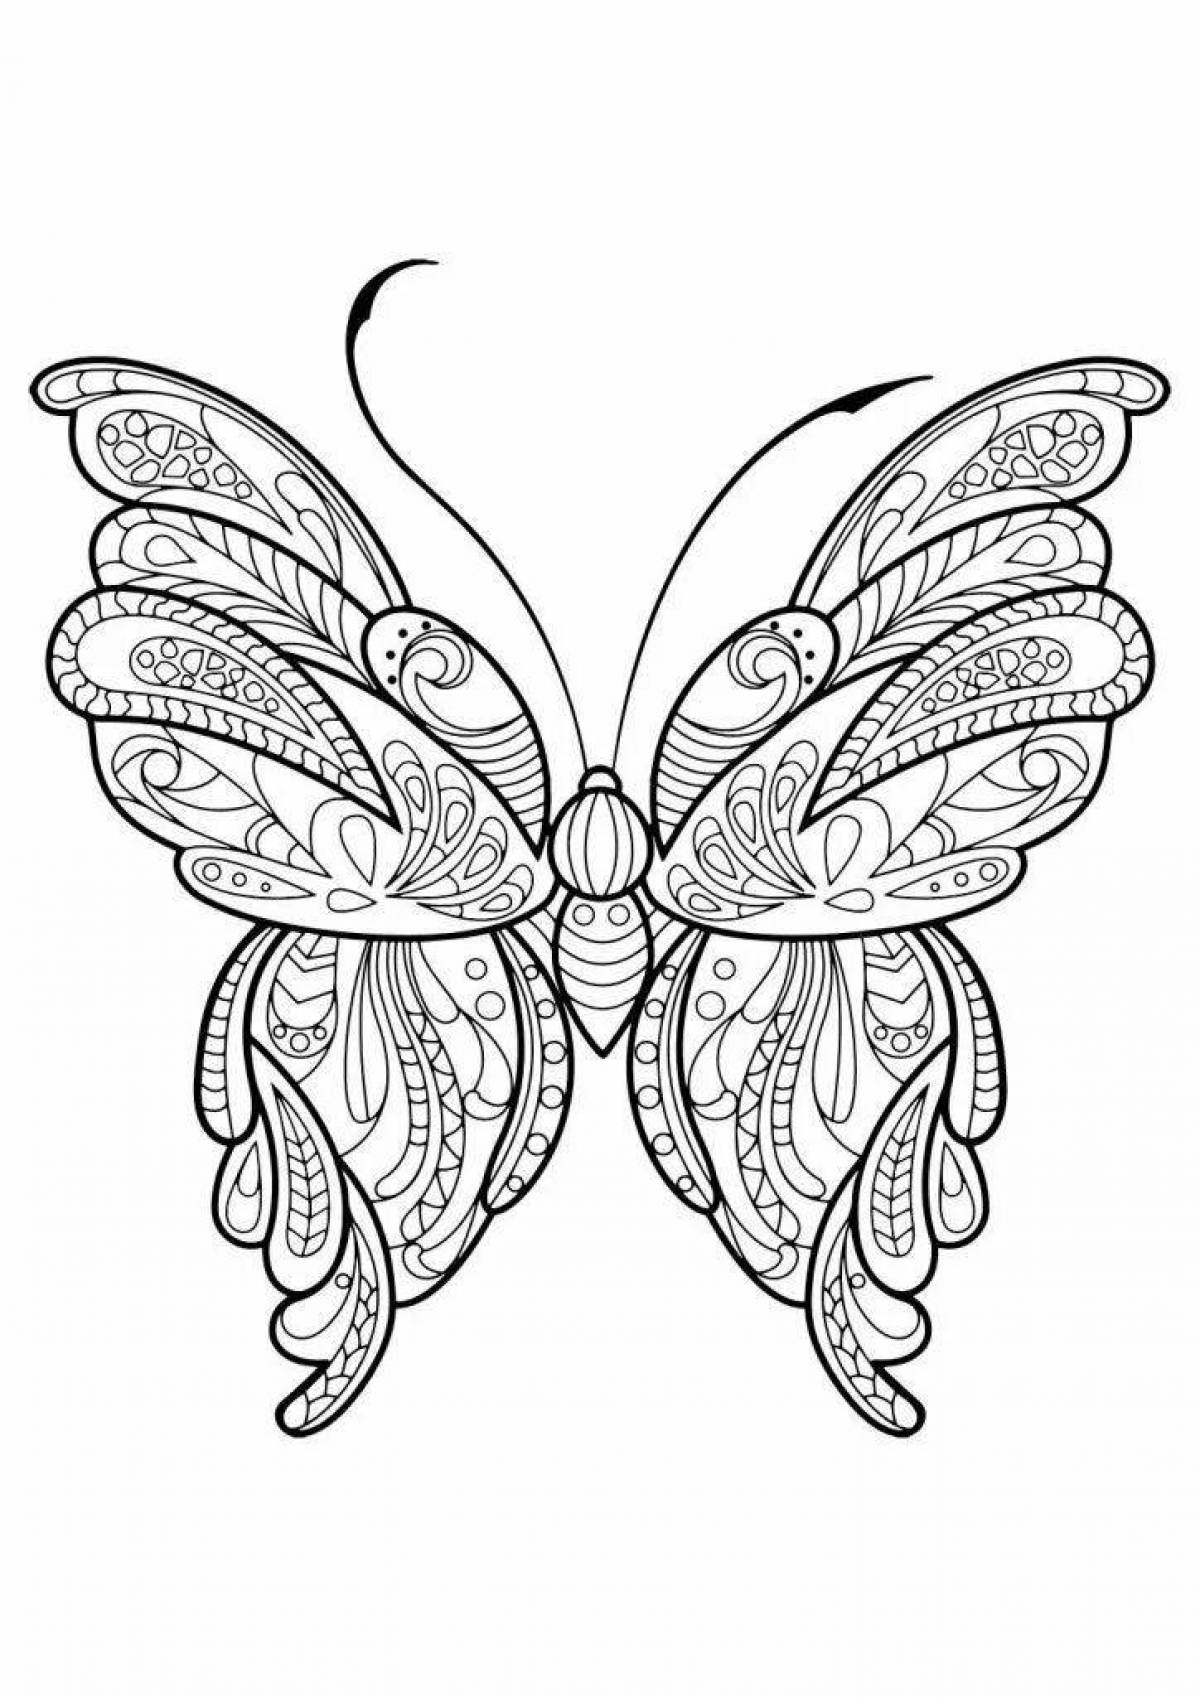 Elegant anti-stress butterfly coloring book